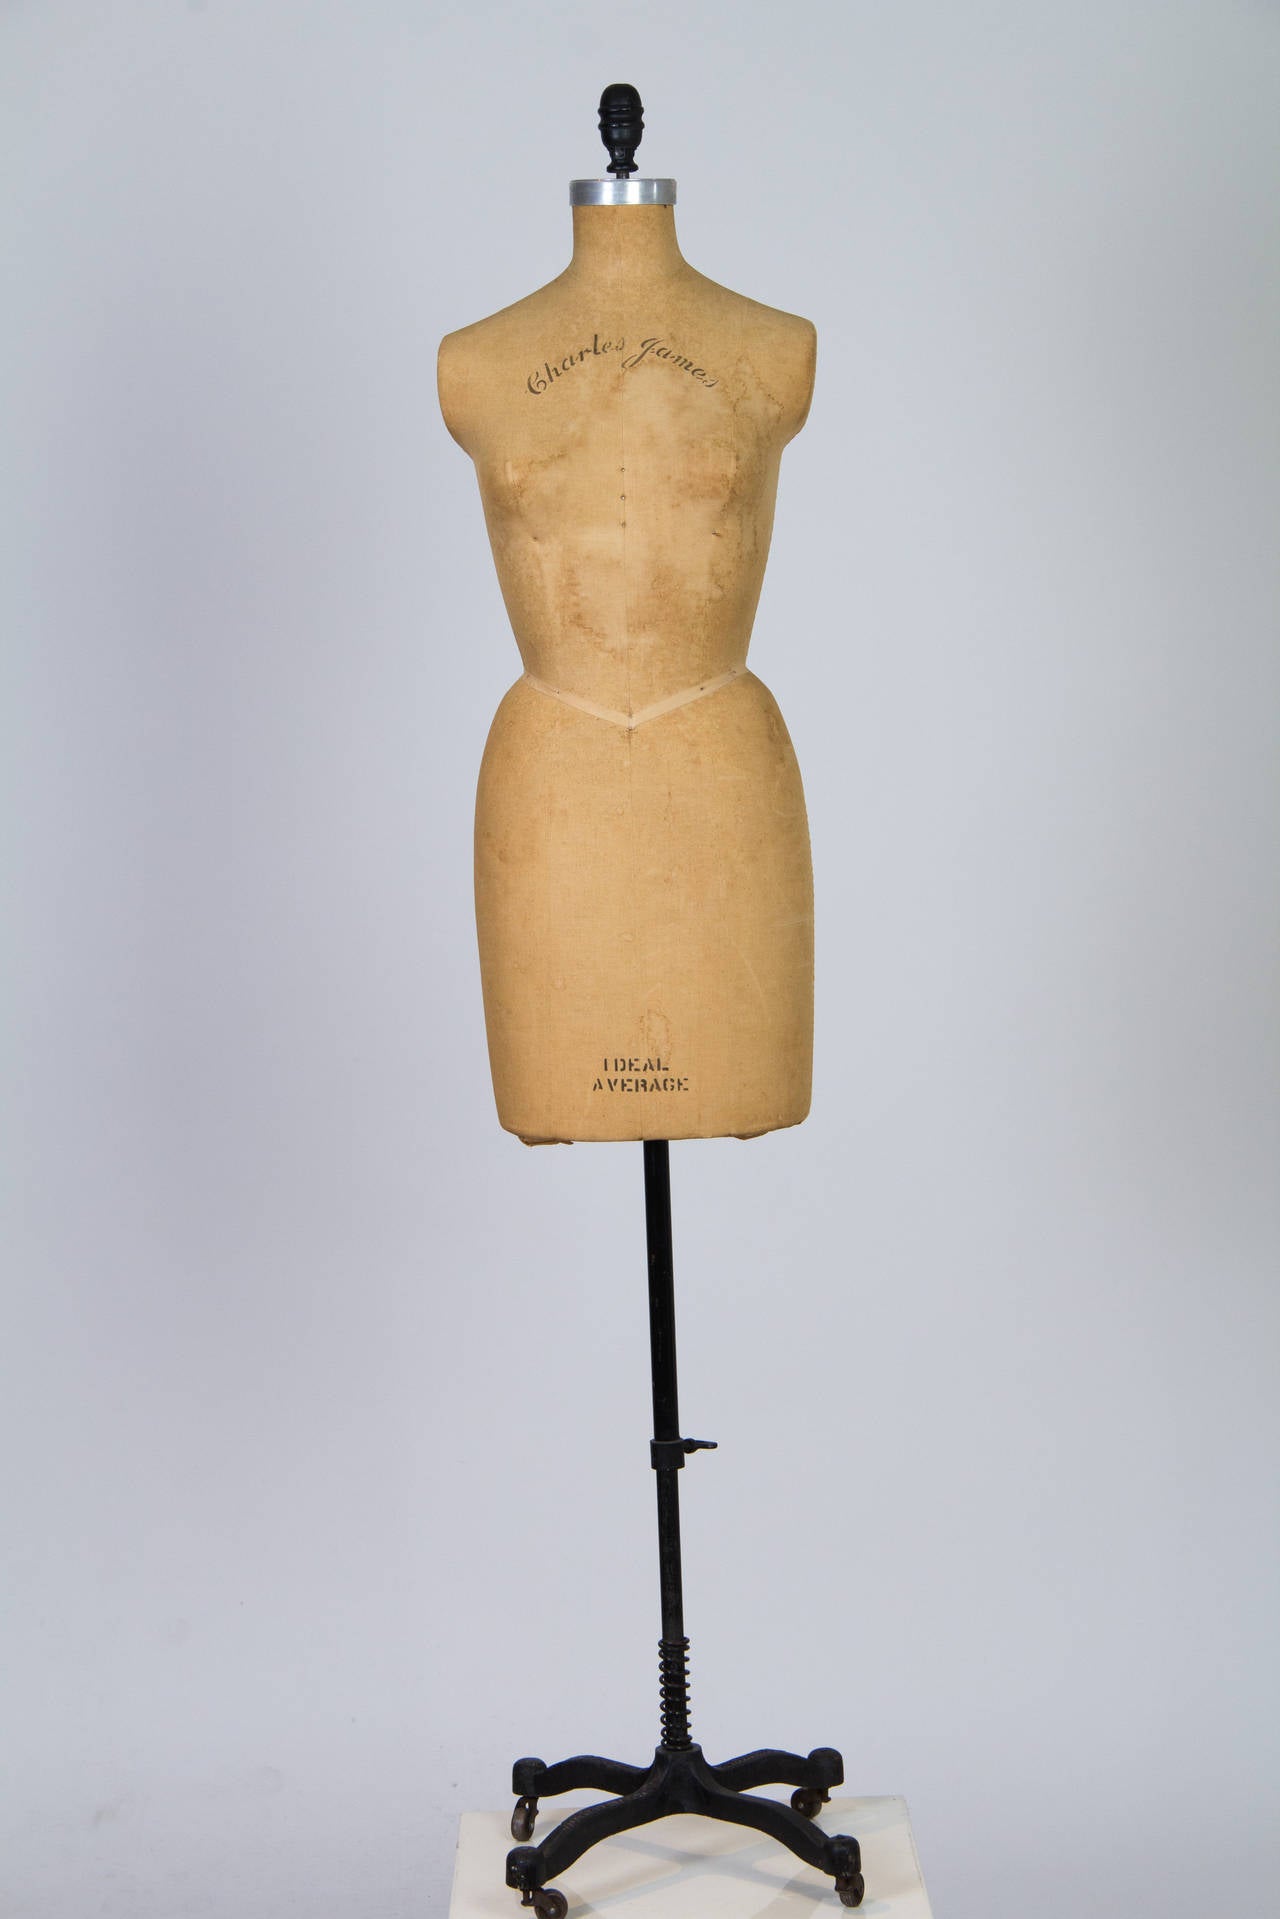 This is an actual original antique Charles James mannequin. It is not only a beautiful display piece for anyone who loves vintage fashion, it is a piece of fashion history. Literally the shape of women's fashion was dictated here first, on this